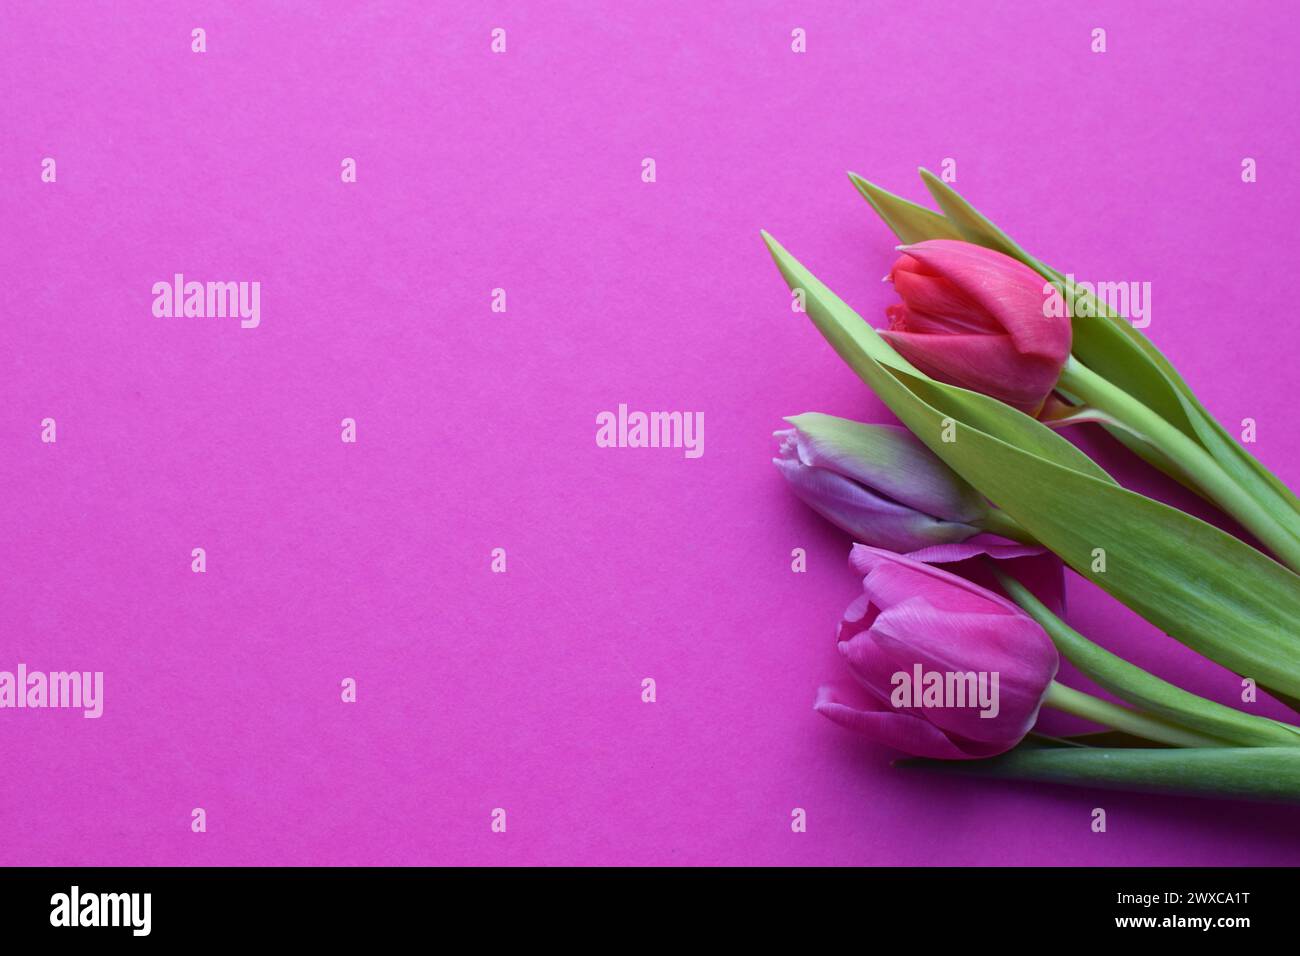 Bouquet of colorful spring tulips for Mother's Day or Women's Day on a  fuchsia background. Top view in flat style. Stock Photo